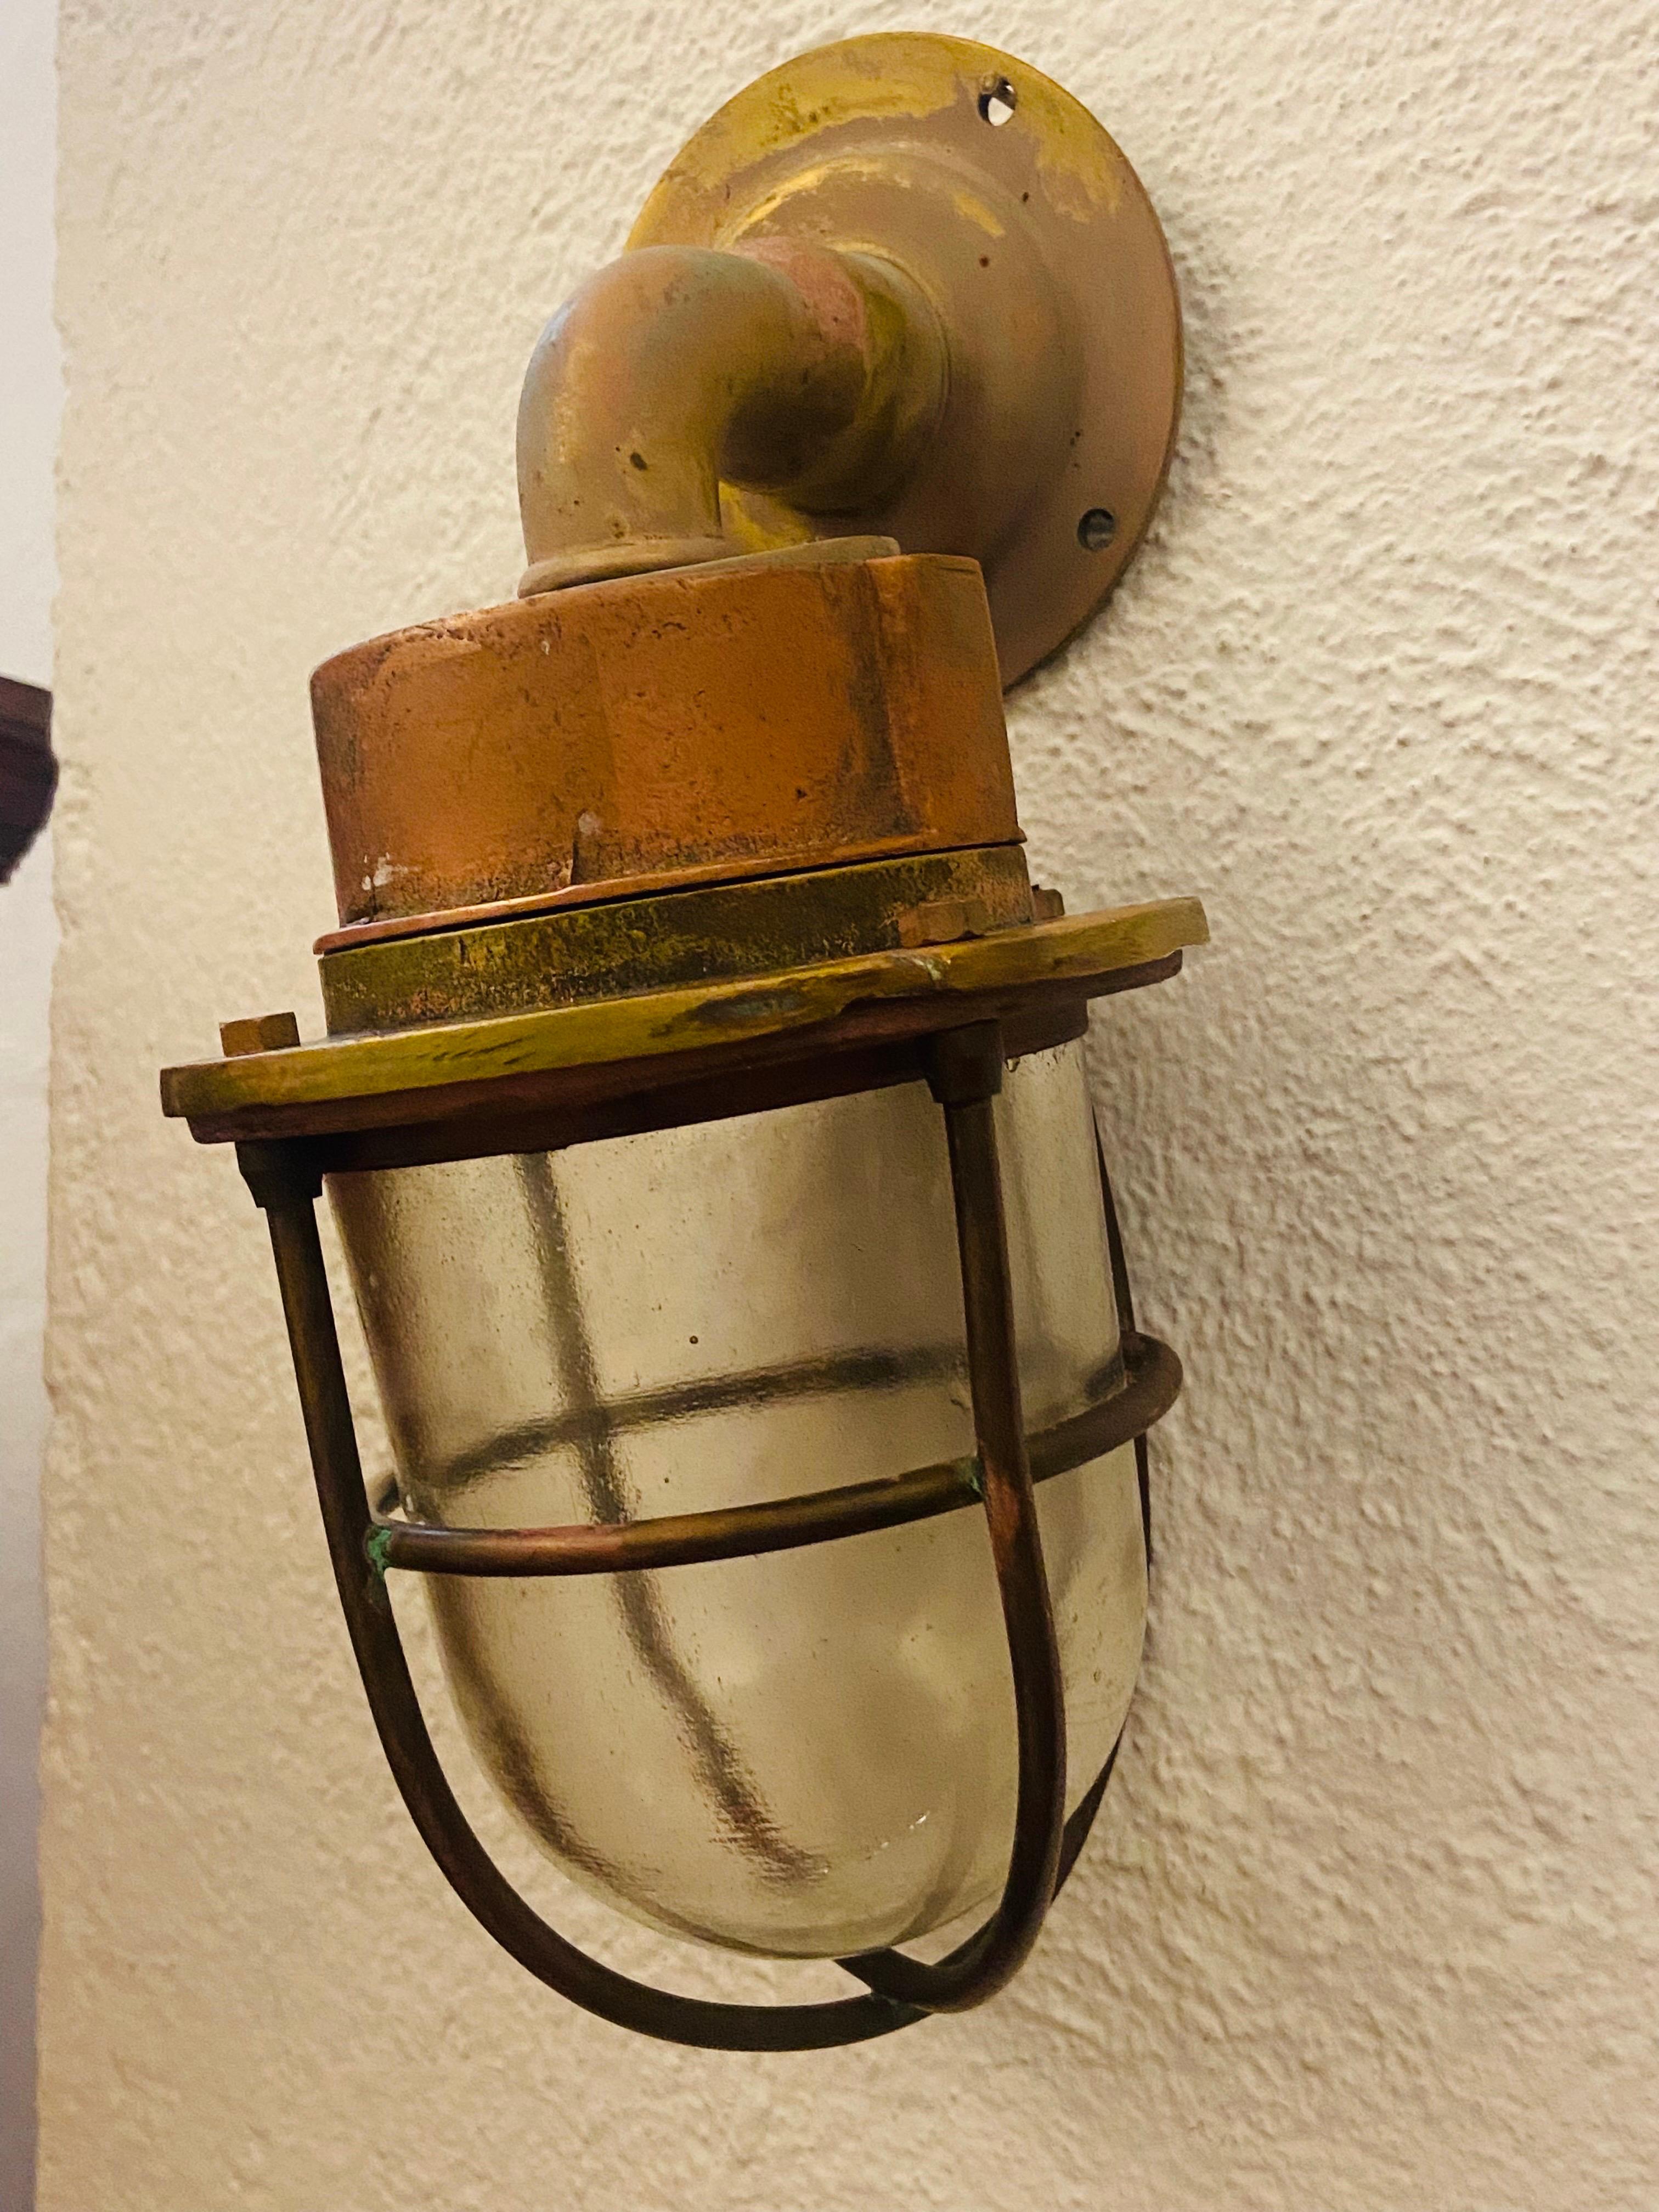 French small wall light made of brass and copper used in military vessels mainly marine minesweeper ships.
Circa 1930.